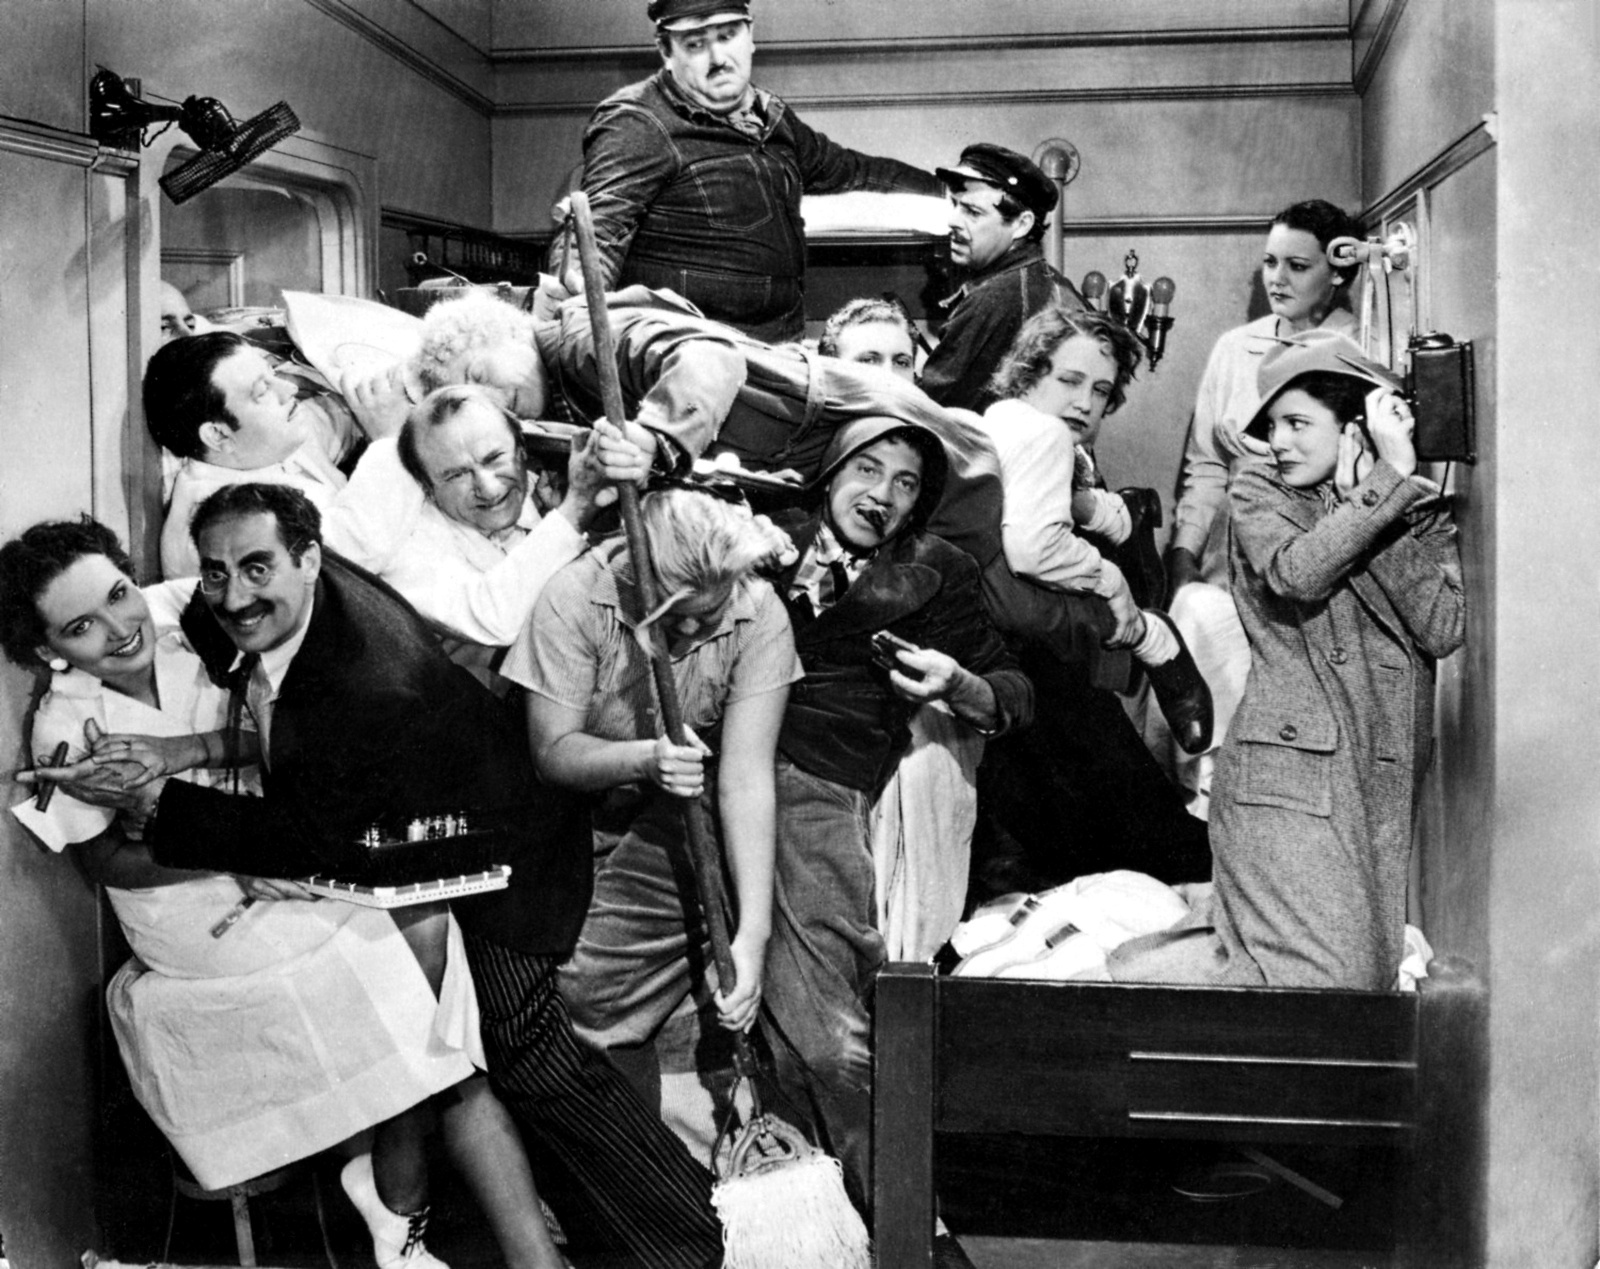 Marx Brothers Crowded room